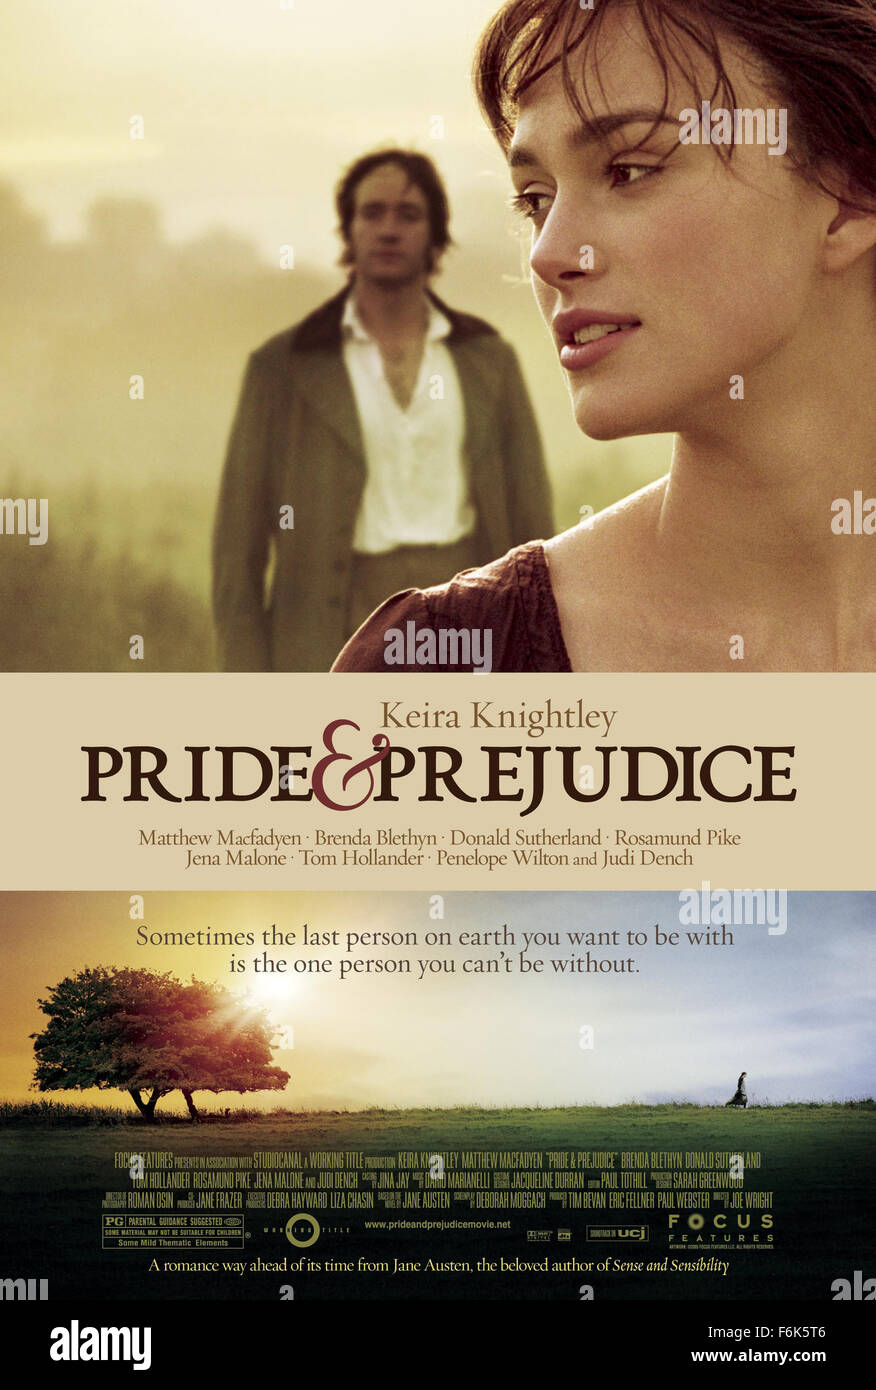 RELEASE DATE: November 23, 2005. MOVIE TITLE: Pride and Prejudice. STUDIO: Focus Features. PLOT: The story is based on Jane Austen's novel about five sisters - Jane, Elizabeth, Mary, Kitty and Lydia Bennet - in Georgian England. Their lives are turned upside down when a wealthy young man (Mr. Bingley) and his best friend (Mr. Darcy) arrive in their neighborhood. PICTURED: MATTHEW MACFADYEN as Mr. Darcy and KEIRA KNIGHTLEY as Elizabeth Bennet. Stock Photo